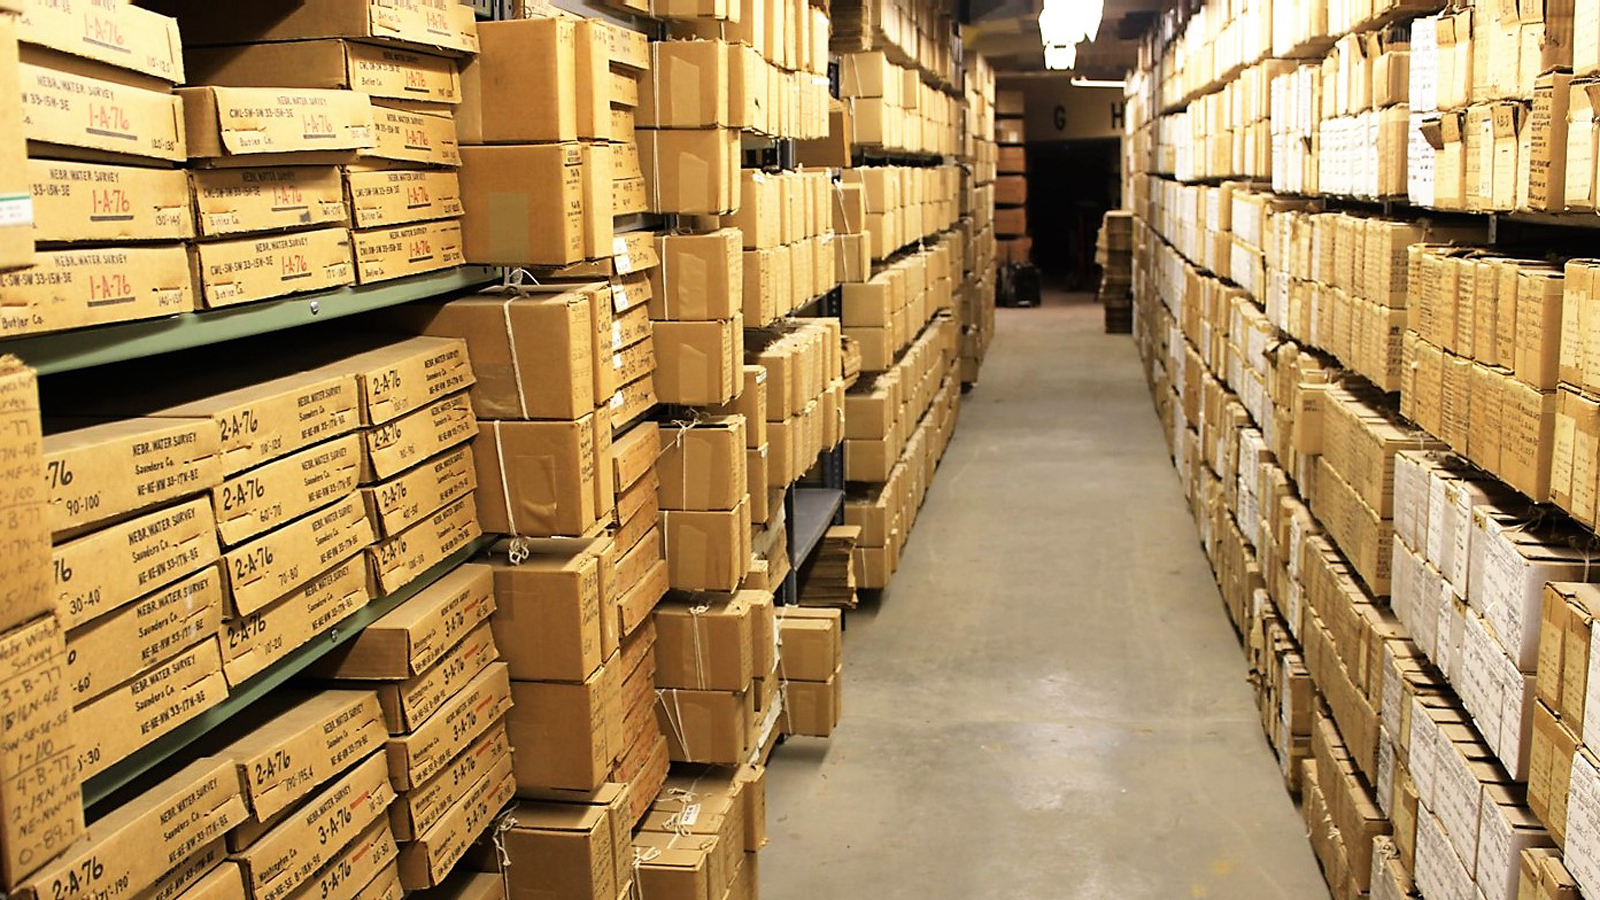 Geological samples at the repository located on the city campus of the University of Nebraska – Lincoln.